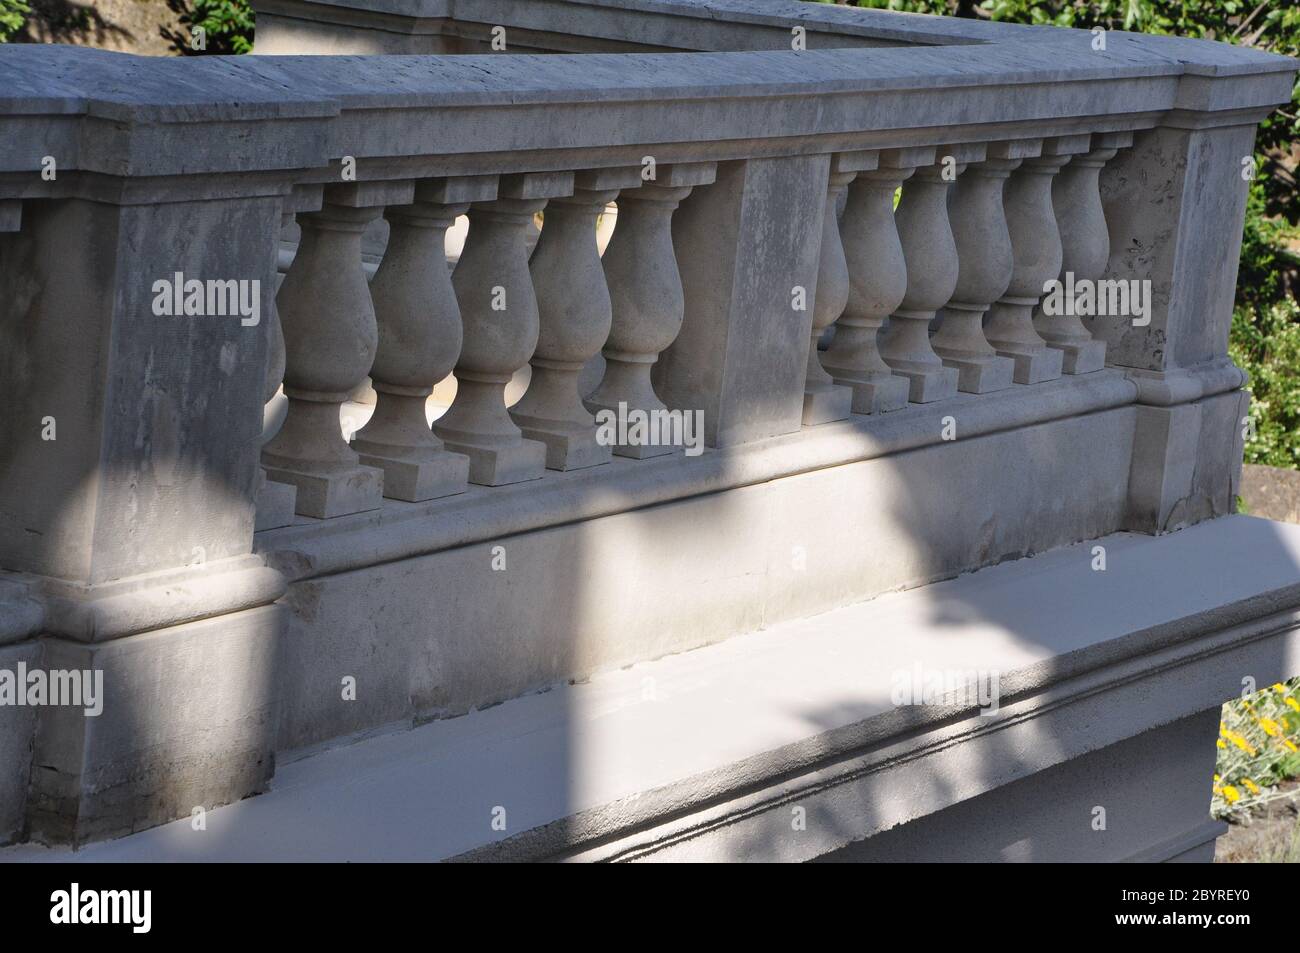 Curving white stone balustrade and railing at green environment Stock Photo